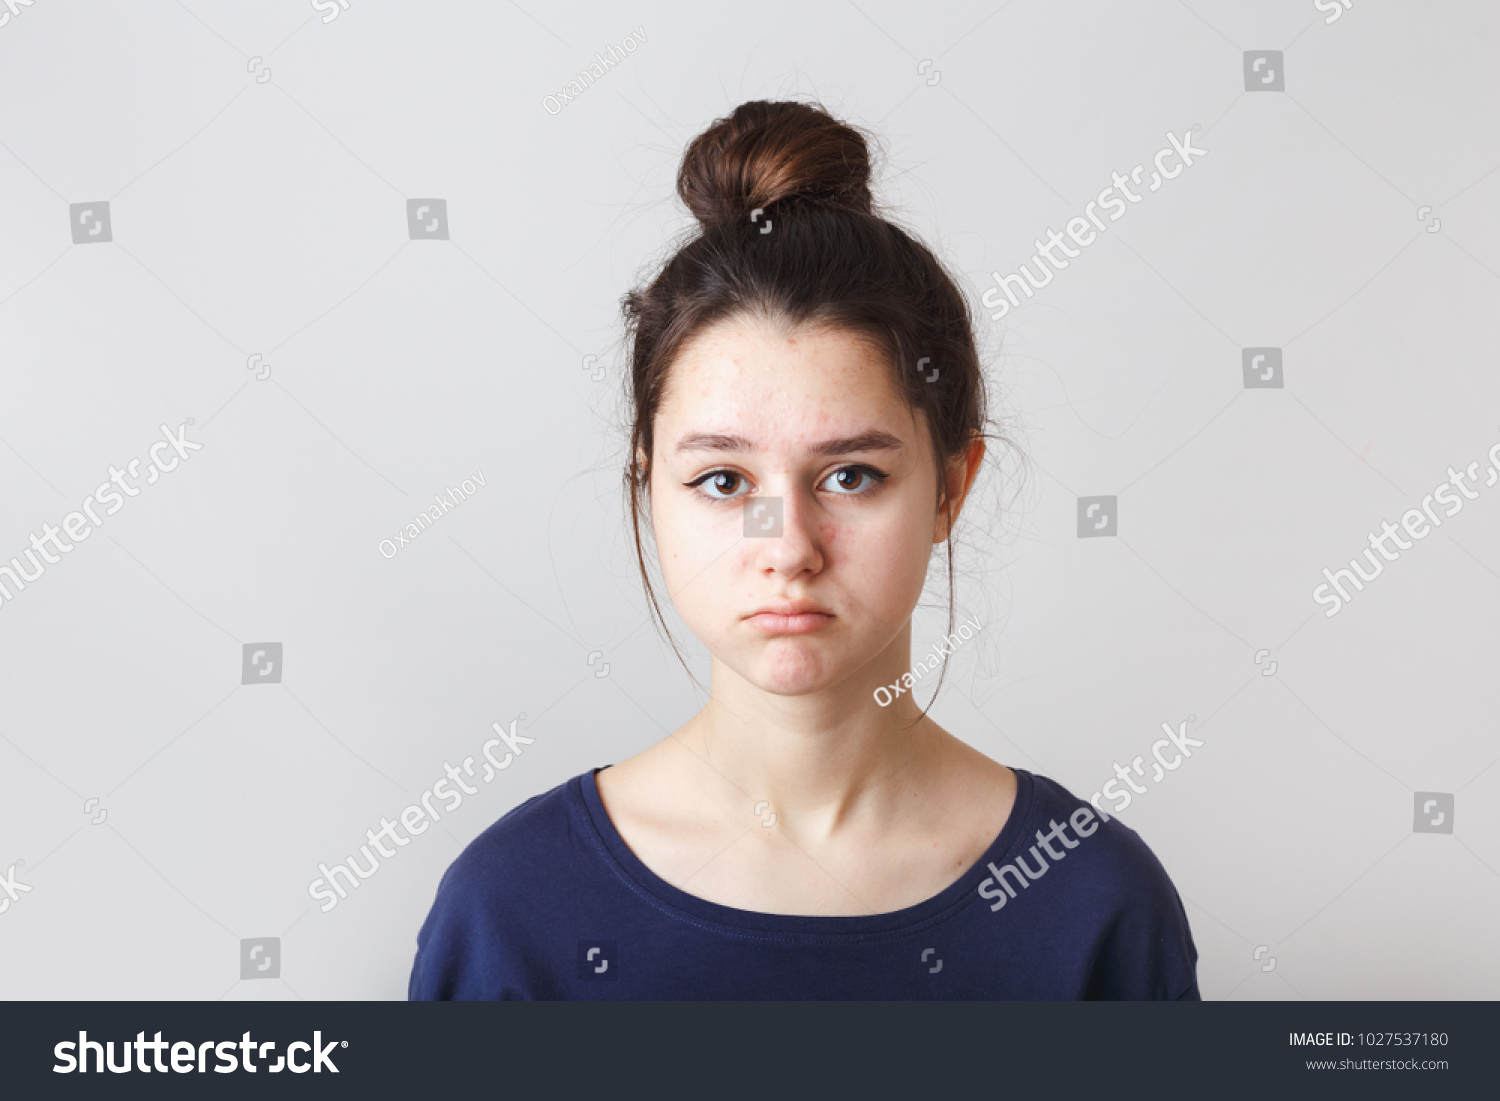 portrait of a pimply teenage girl in a blue T-shirt on a gray background, sad face #1027537180